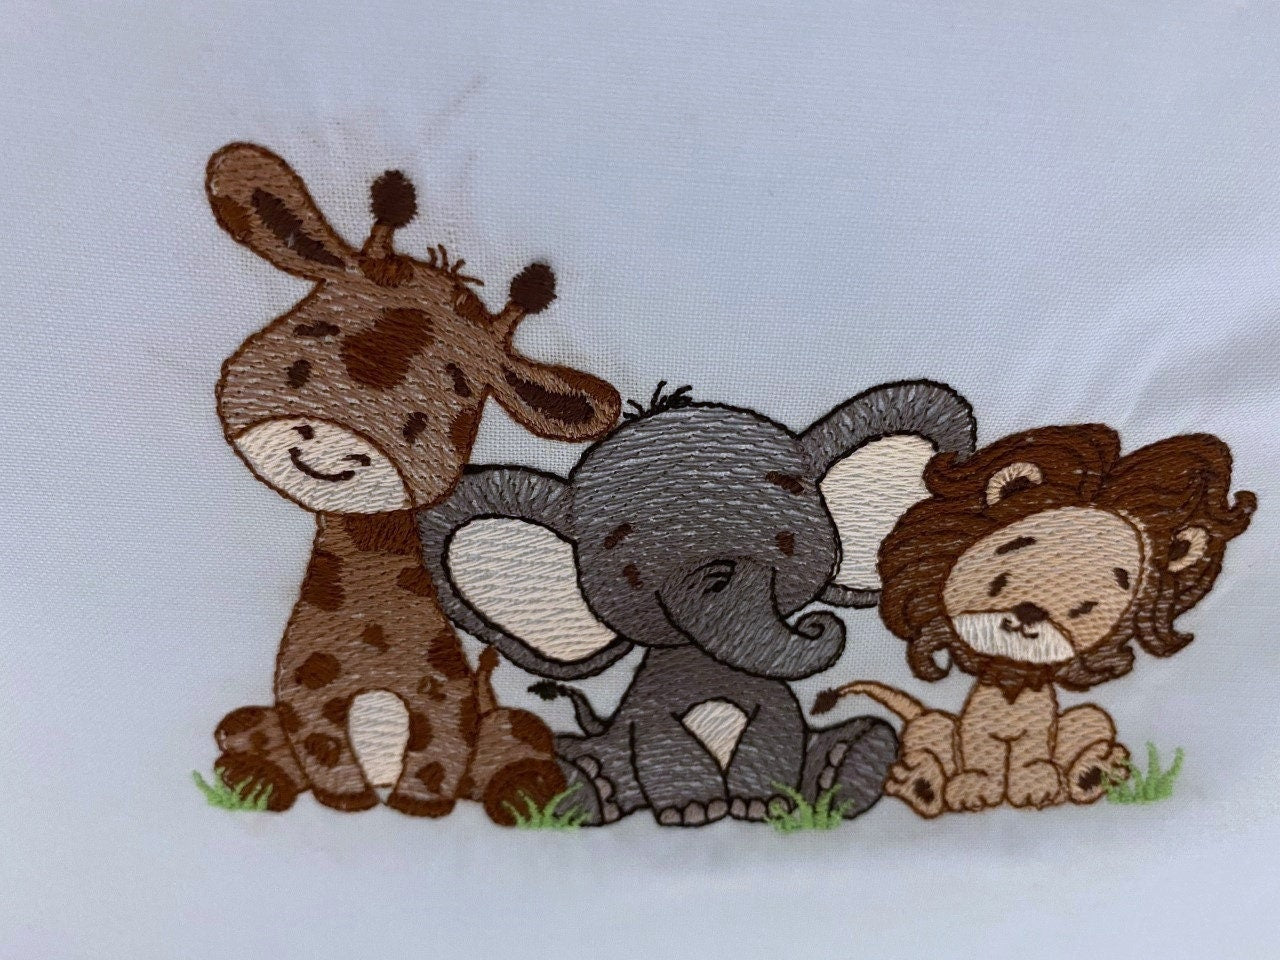 Diaper Caddy Storage Organizer Baby's room Diapers Bottles Embroidered Giraffe Lion Elephant